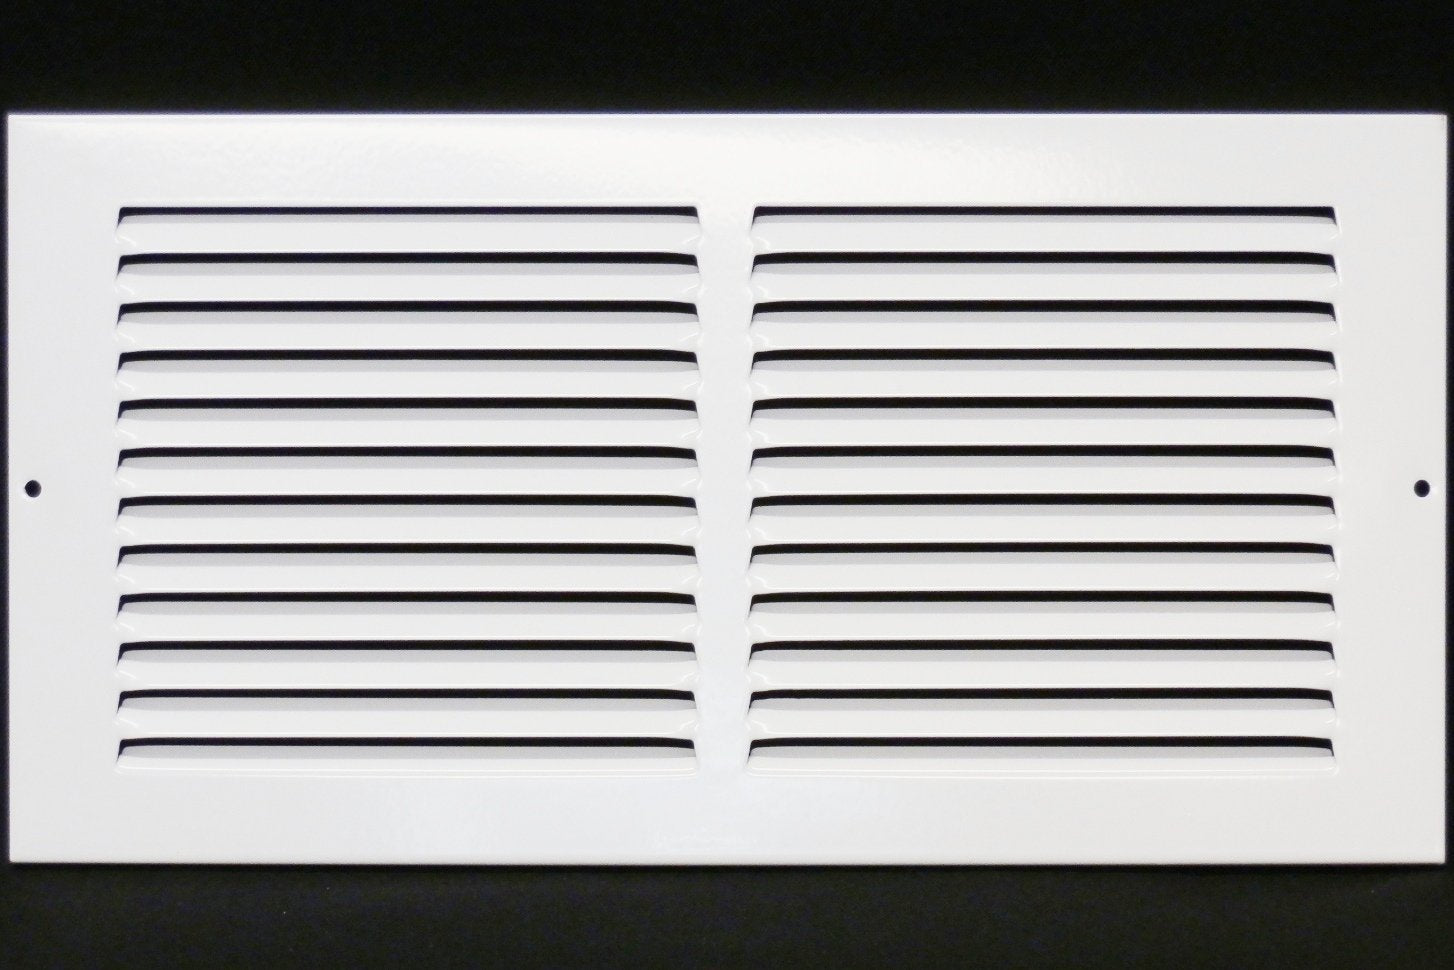 14" X 12" Air Vent Return Grilles - Sidewall and Ceiling - Steel